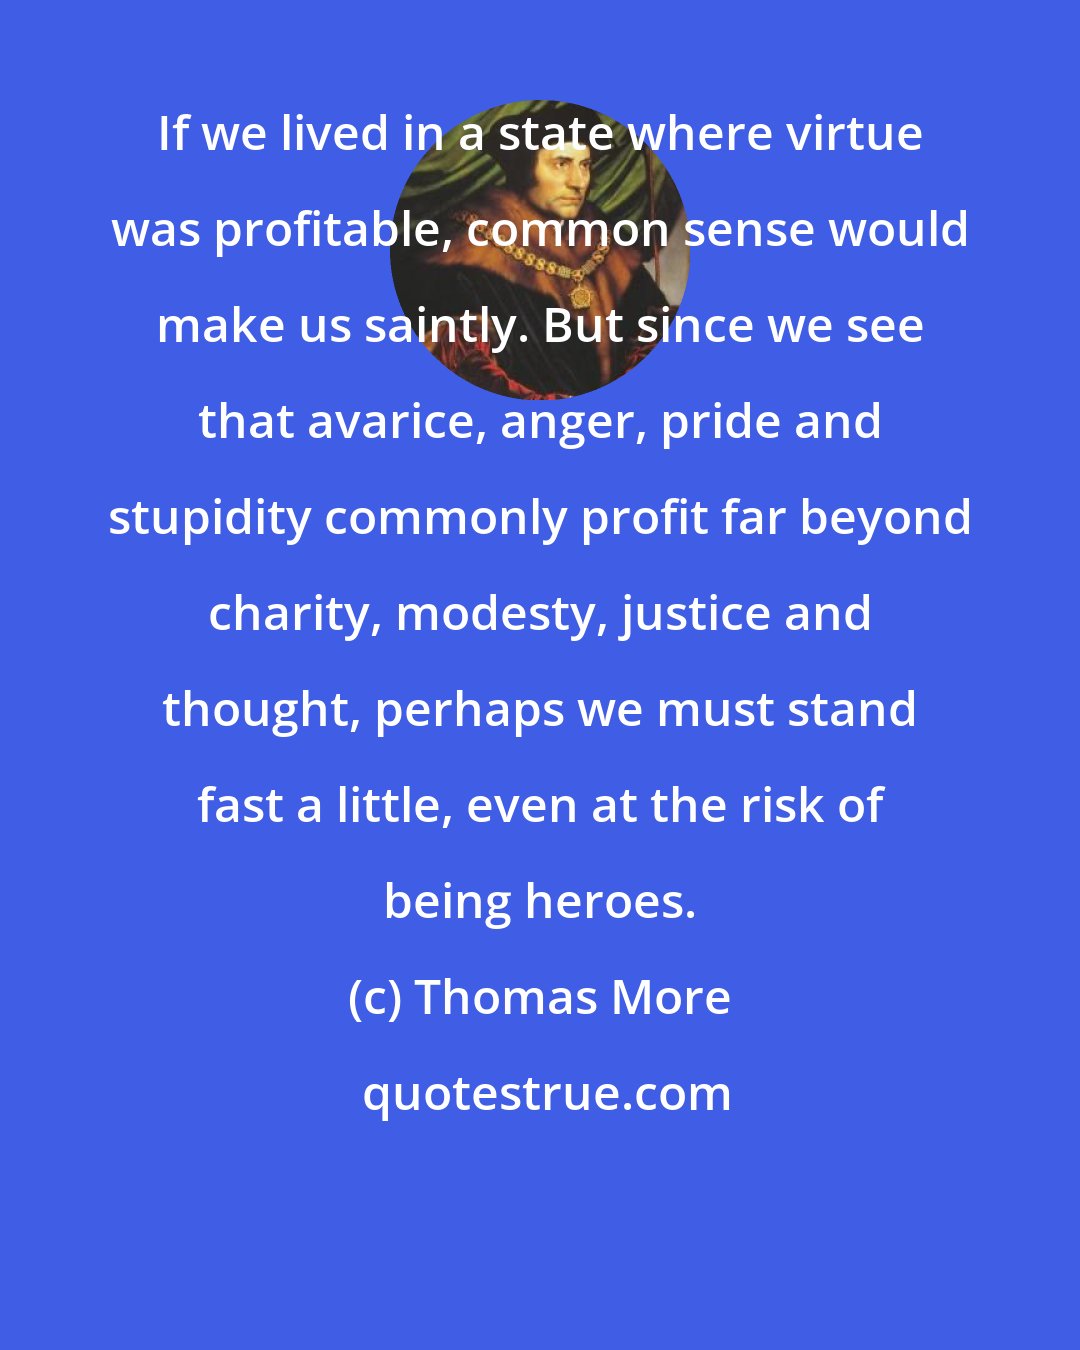 Thomas More: If we lived in a state where virtue was profitable, common sense would make us saintly. But since we see that avarice, anger, pride and stupidity commonly profit far beyond charity, modesty, justice and thought, perhaps we must stand fast a little, even at the risk of being heroes.